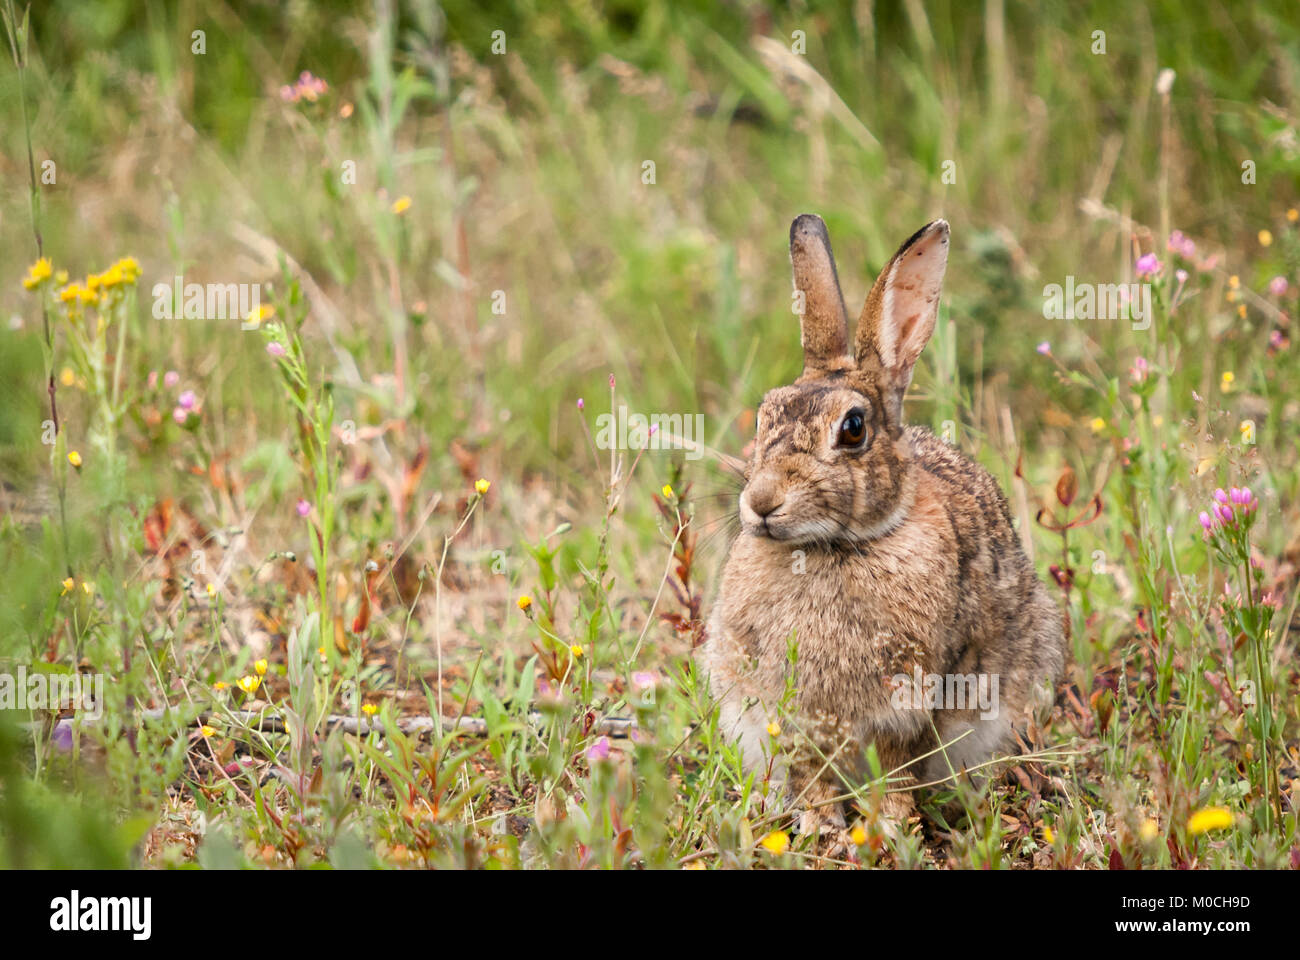 A European Rabbit, Oryctolagus cuniculus, sitting amongst the grass and flowers at Potteric Carr Nature reserve, Yorkshire, England. 03 July 2010 Stock Photo